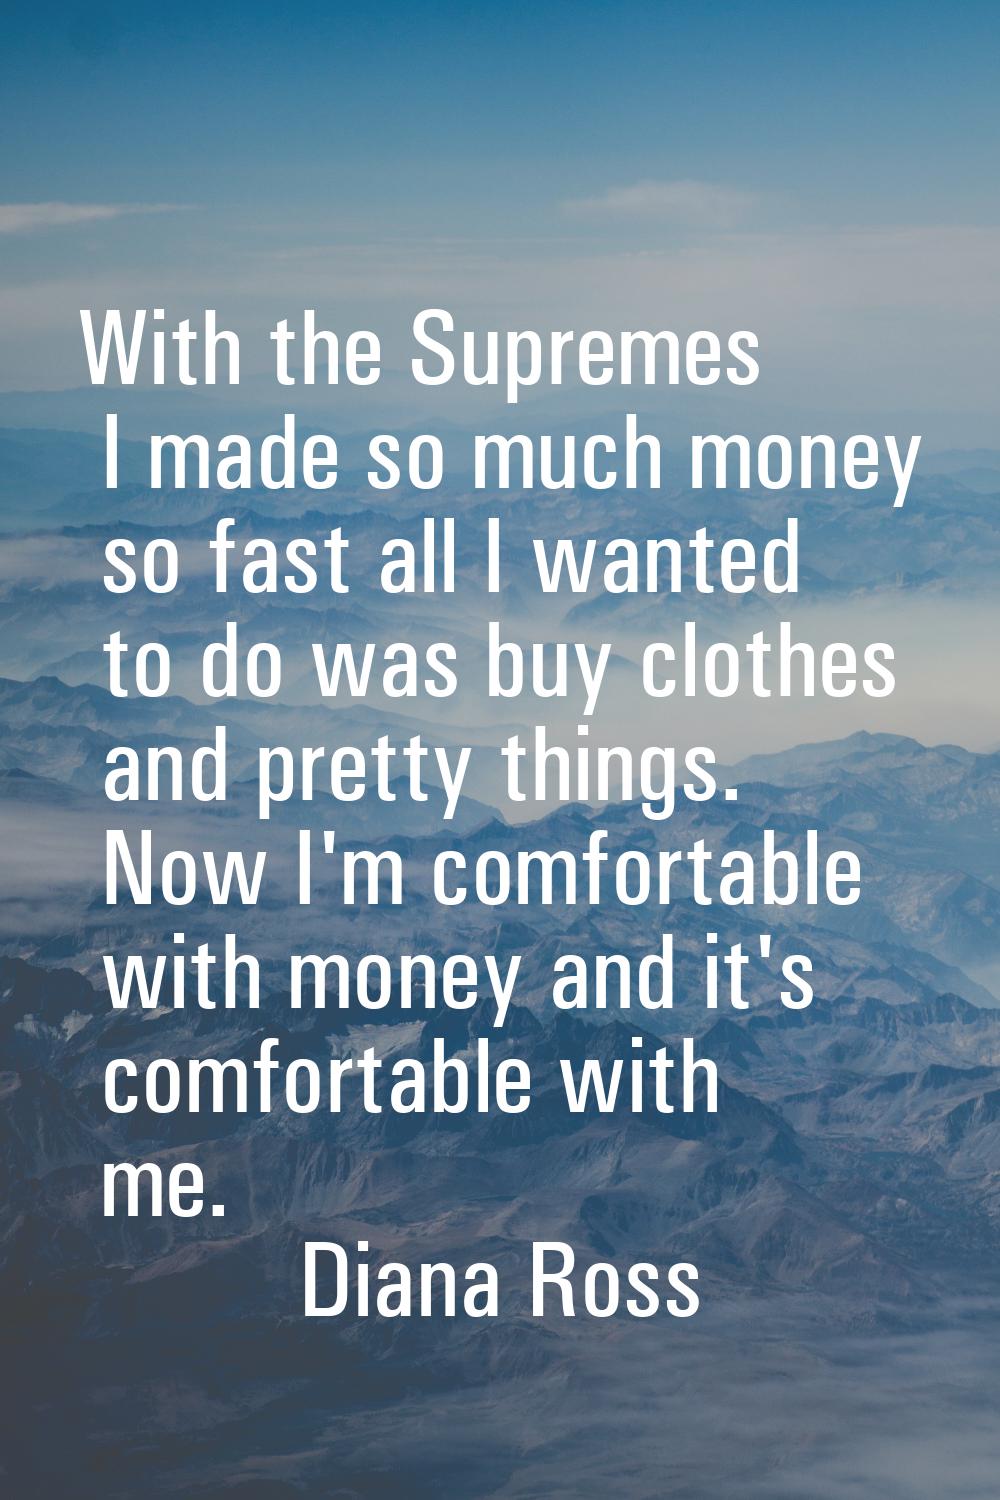 With the Supremes I made so much money so fast all I wanted to do was buy clothes and pretty things